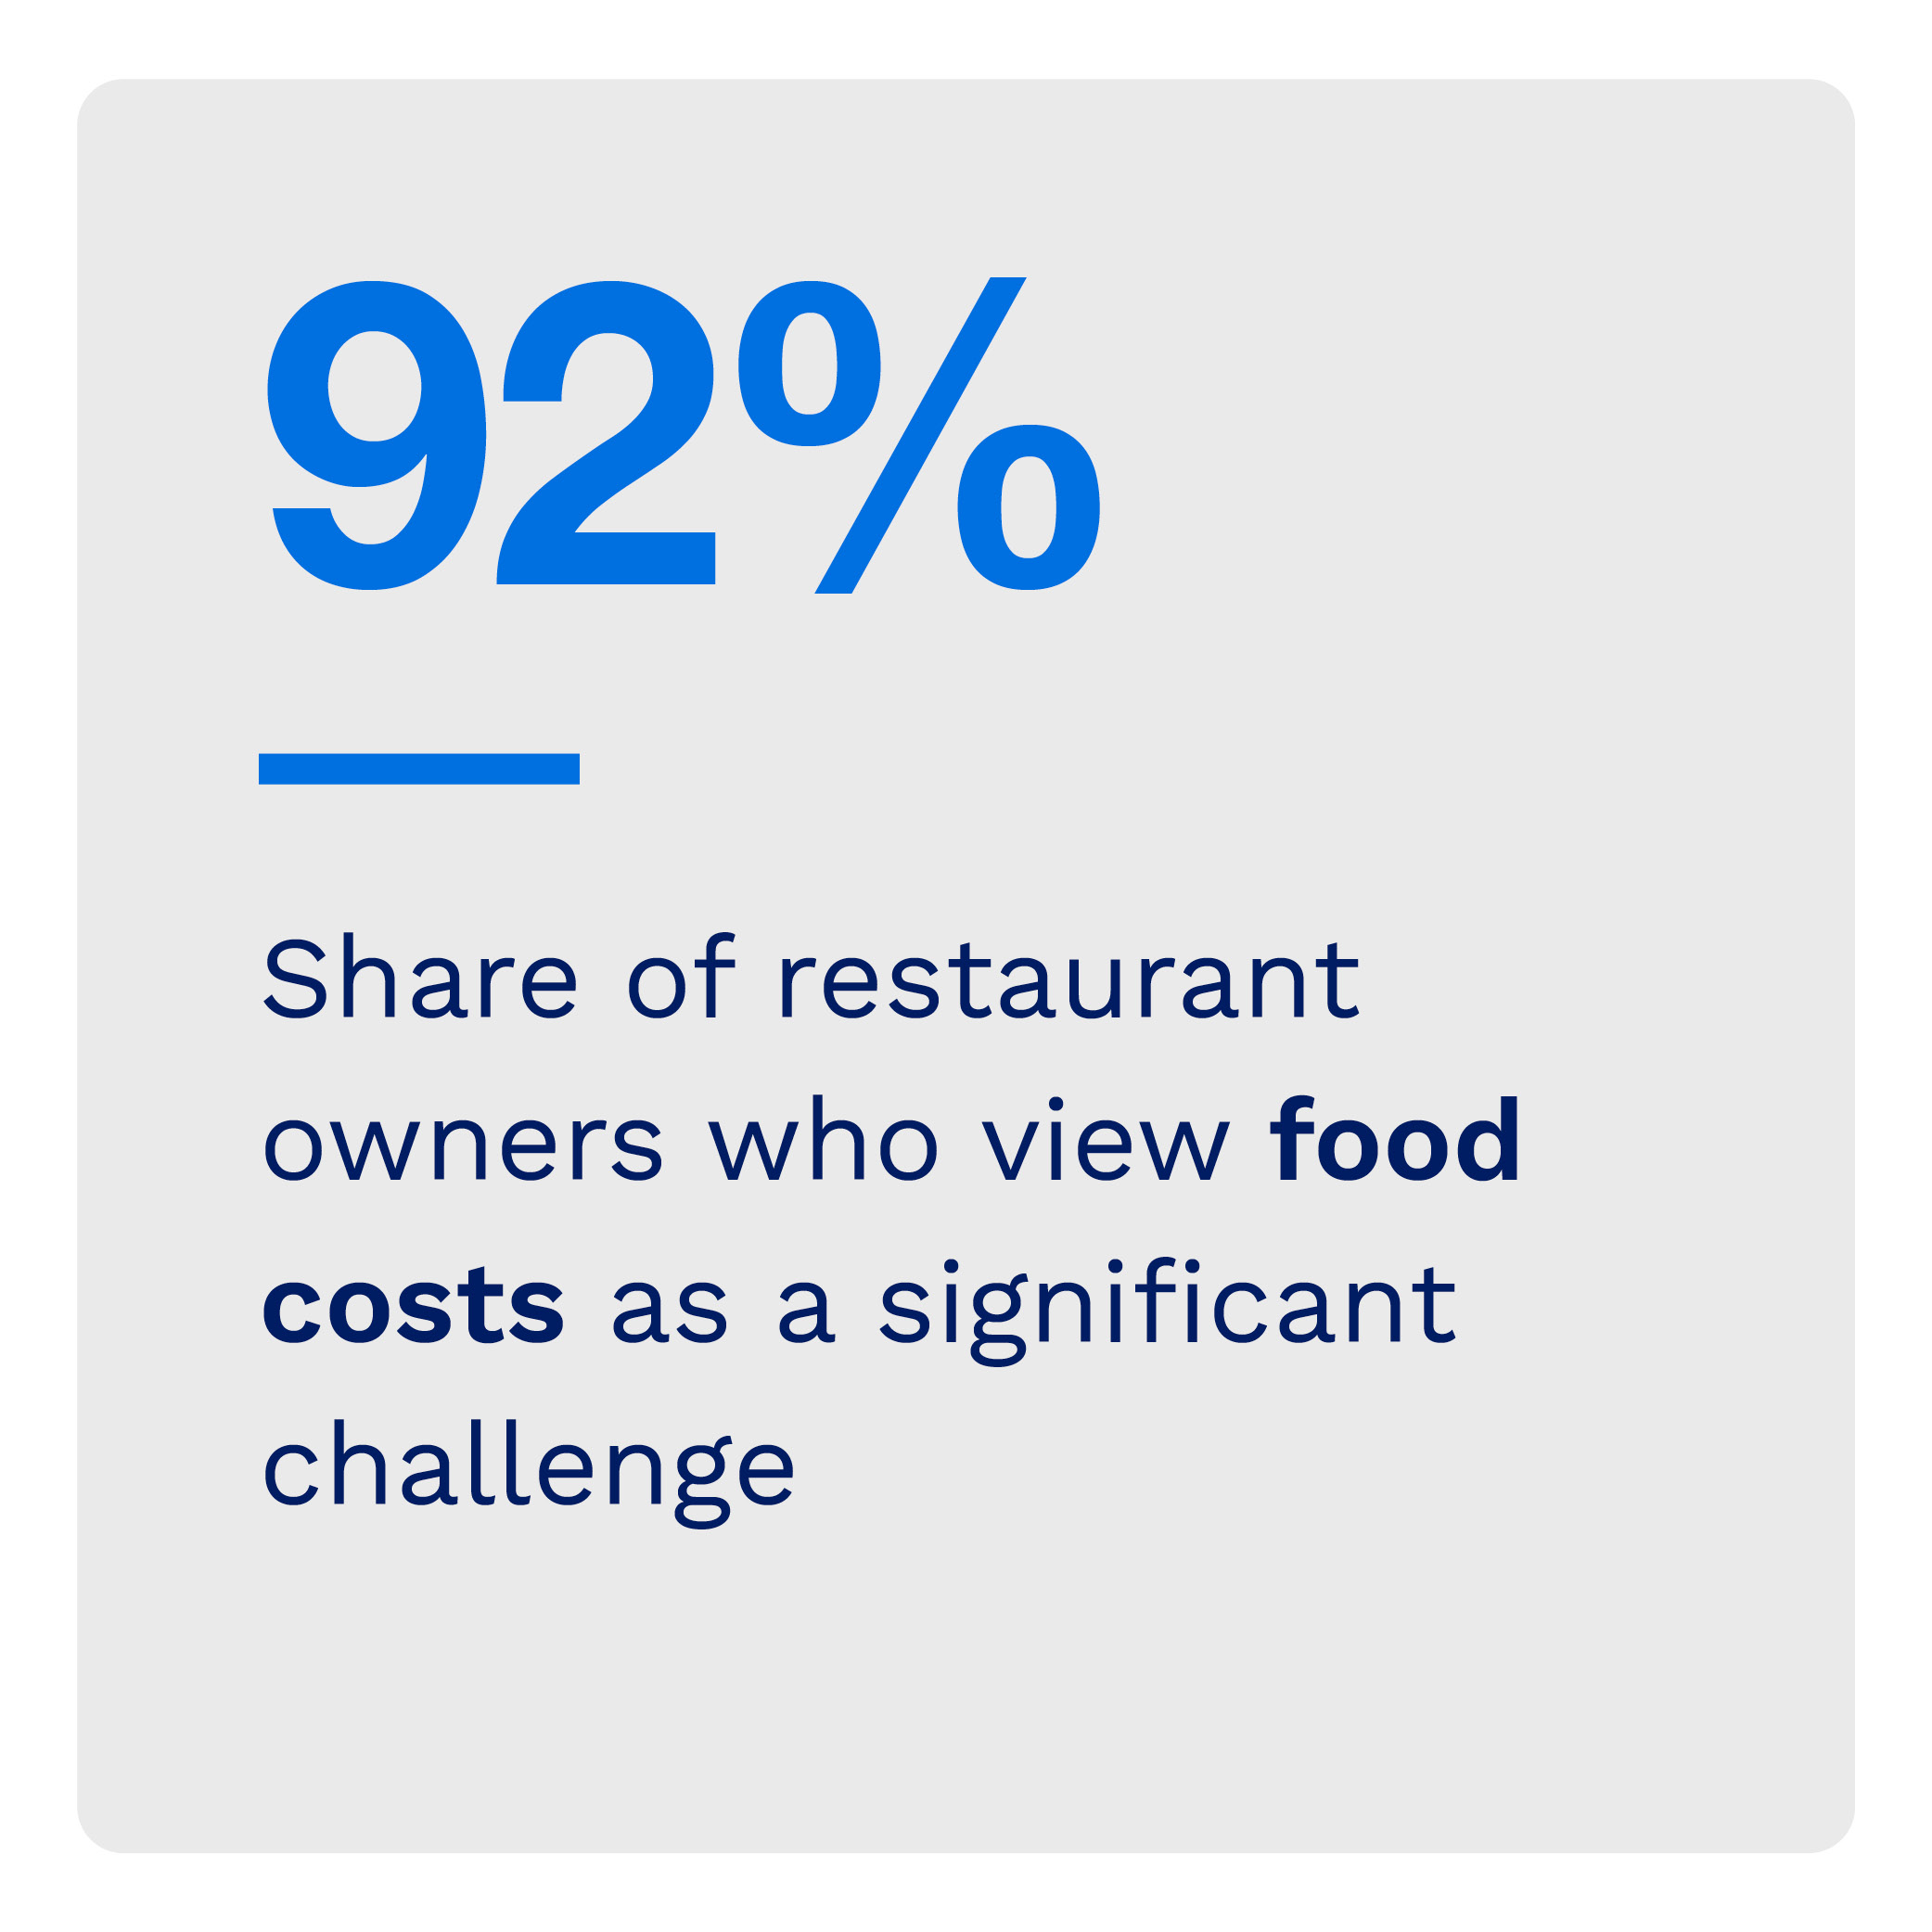 92%: Share of restaurant owners who view food costs as a significant challenge